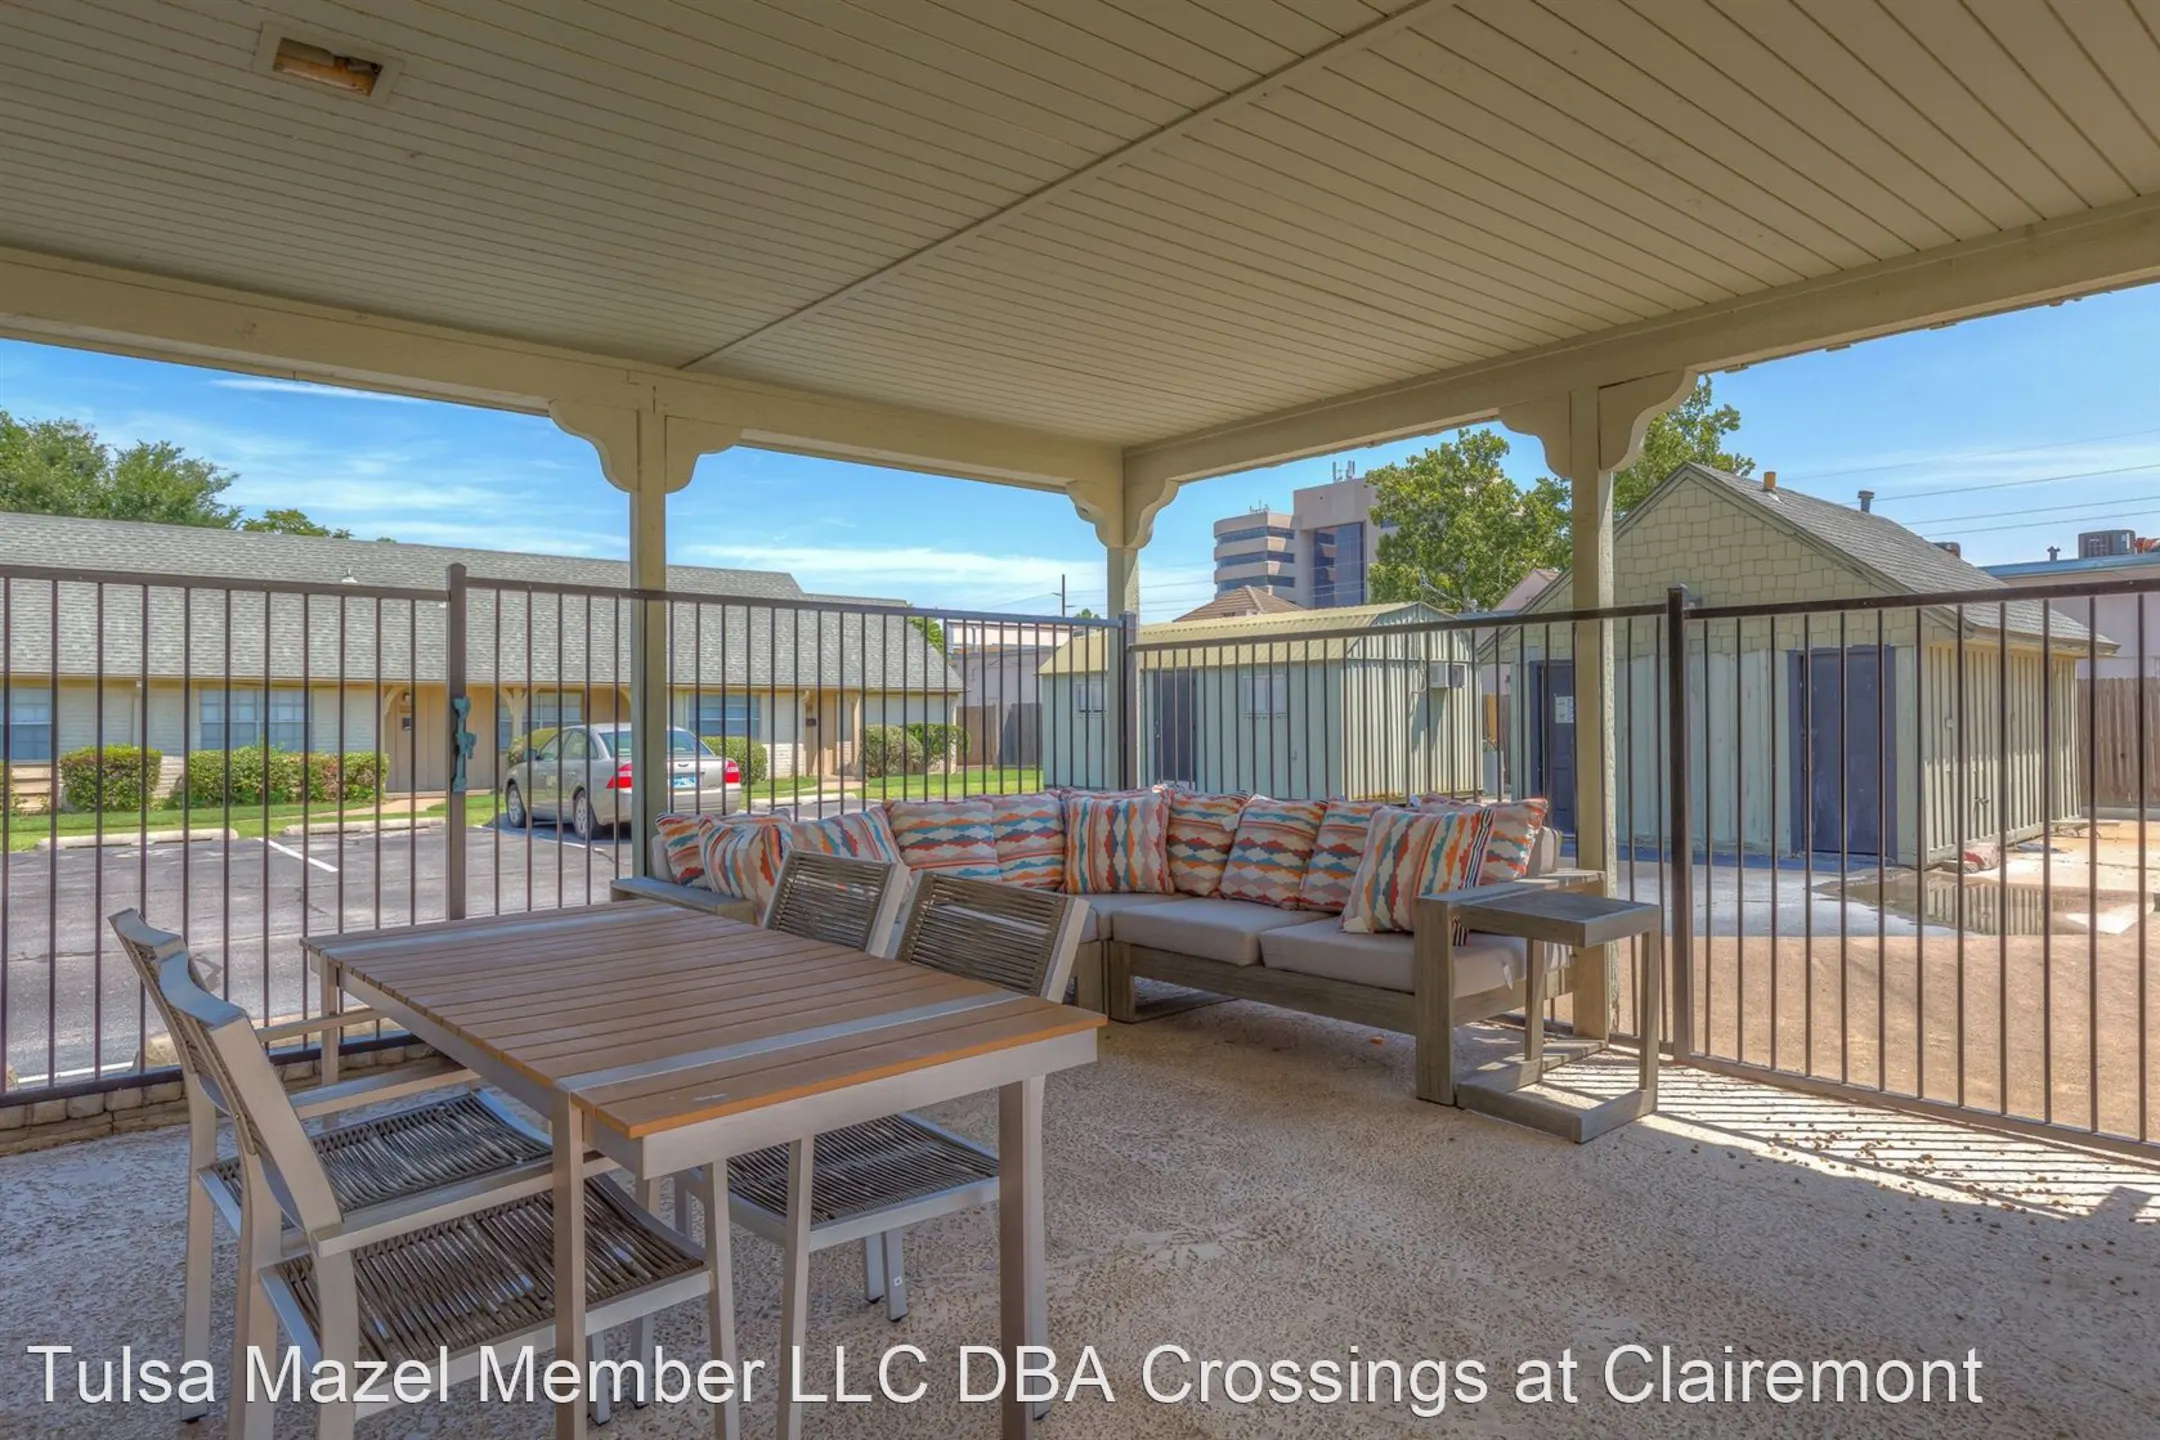 Patio / Deck - Crossings at Clairemont - Tulsa, OK